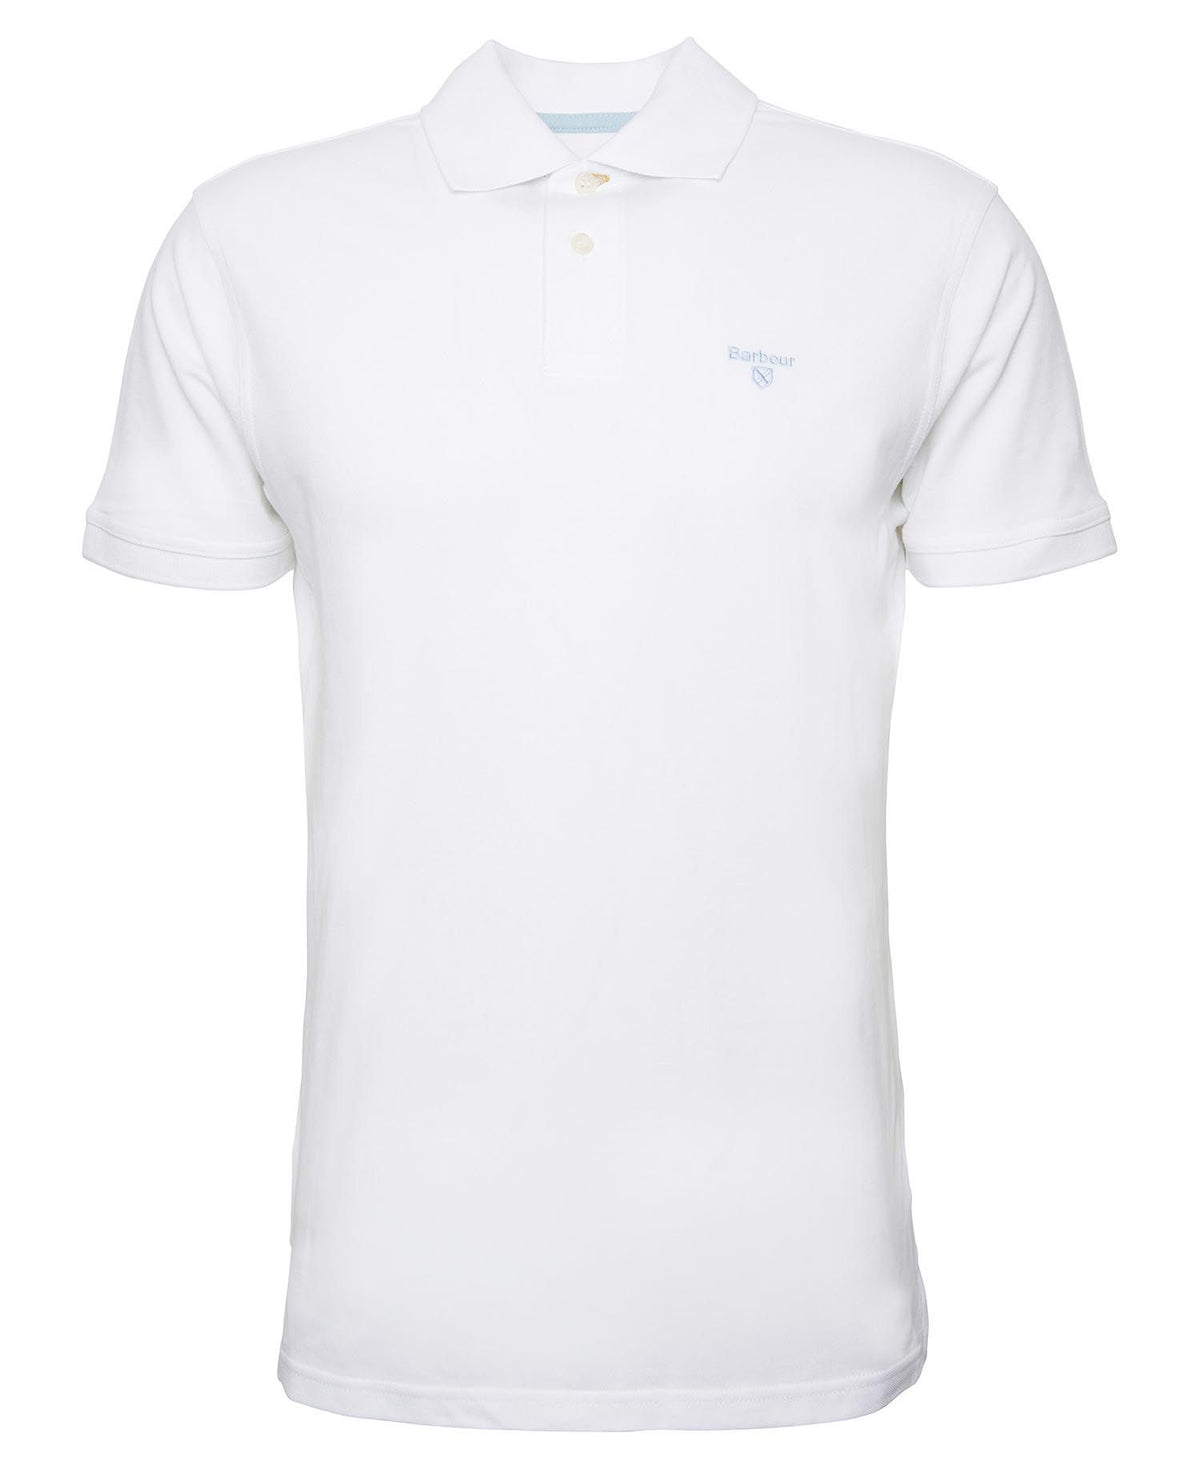 Barbour White men's lightweight sports polo